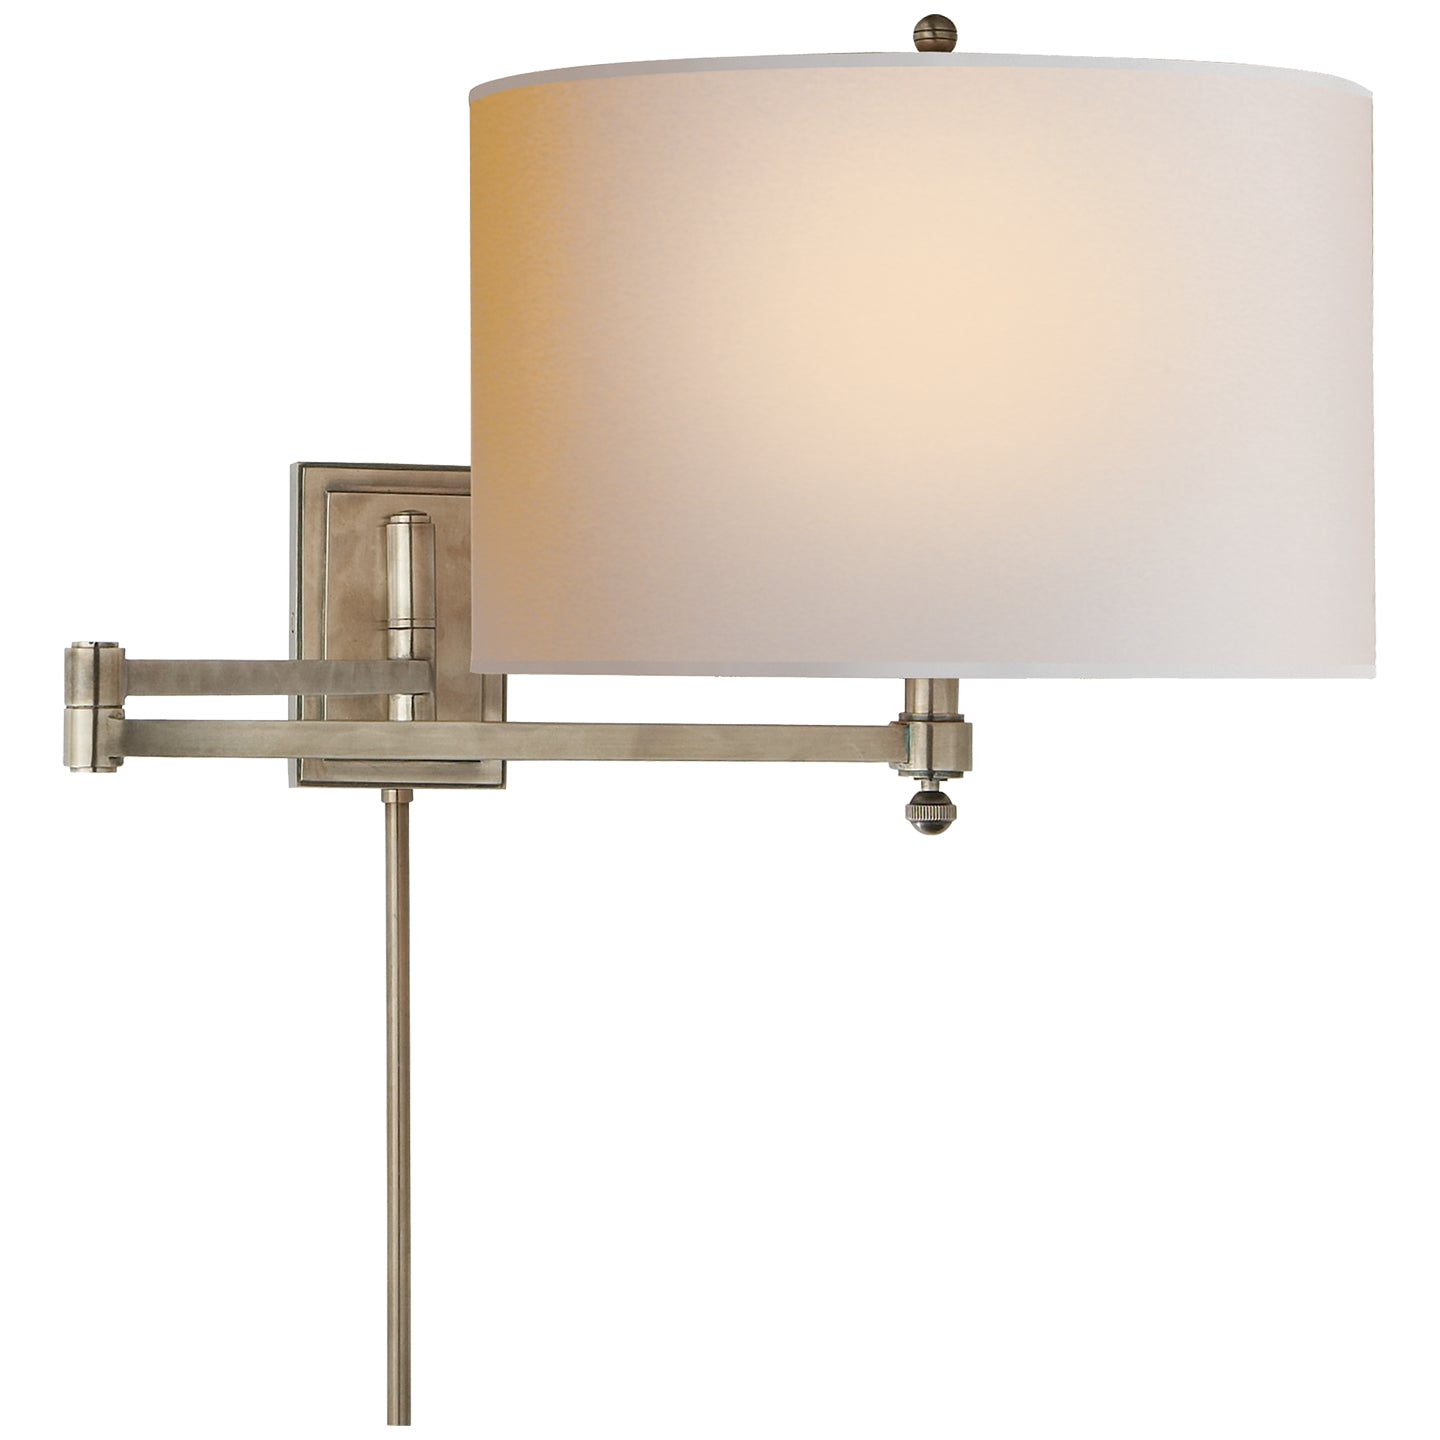 Visual Comfort Signature - TOB 2204AN-NP - One Light Wall Sconce - Hudson - Antique Nickel